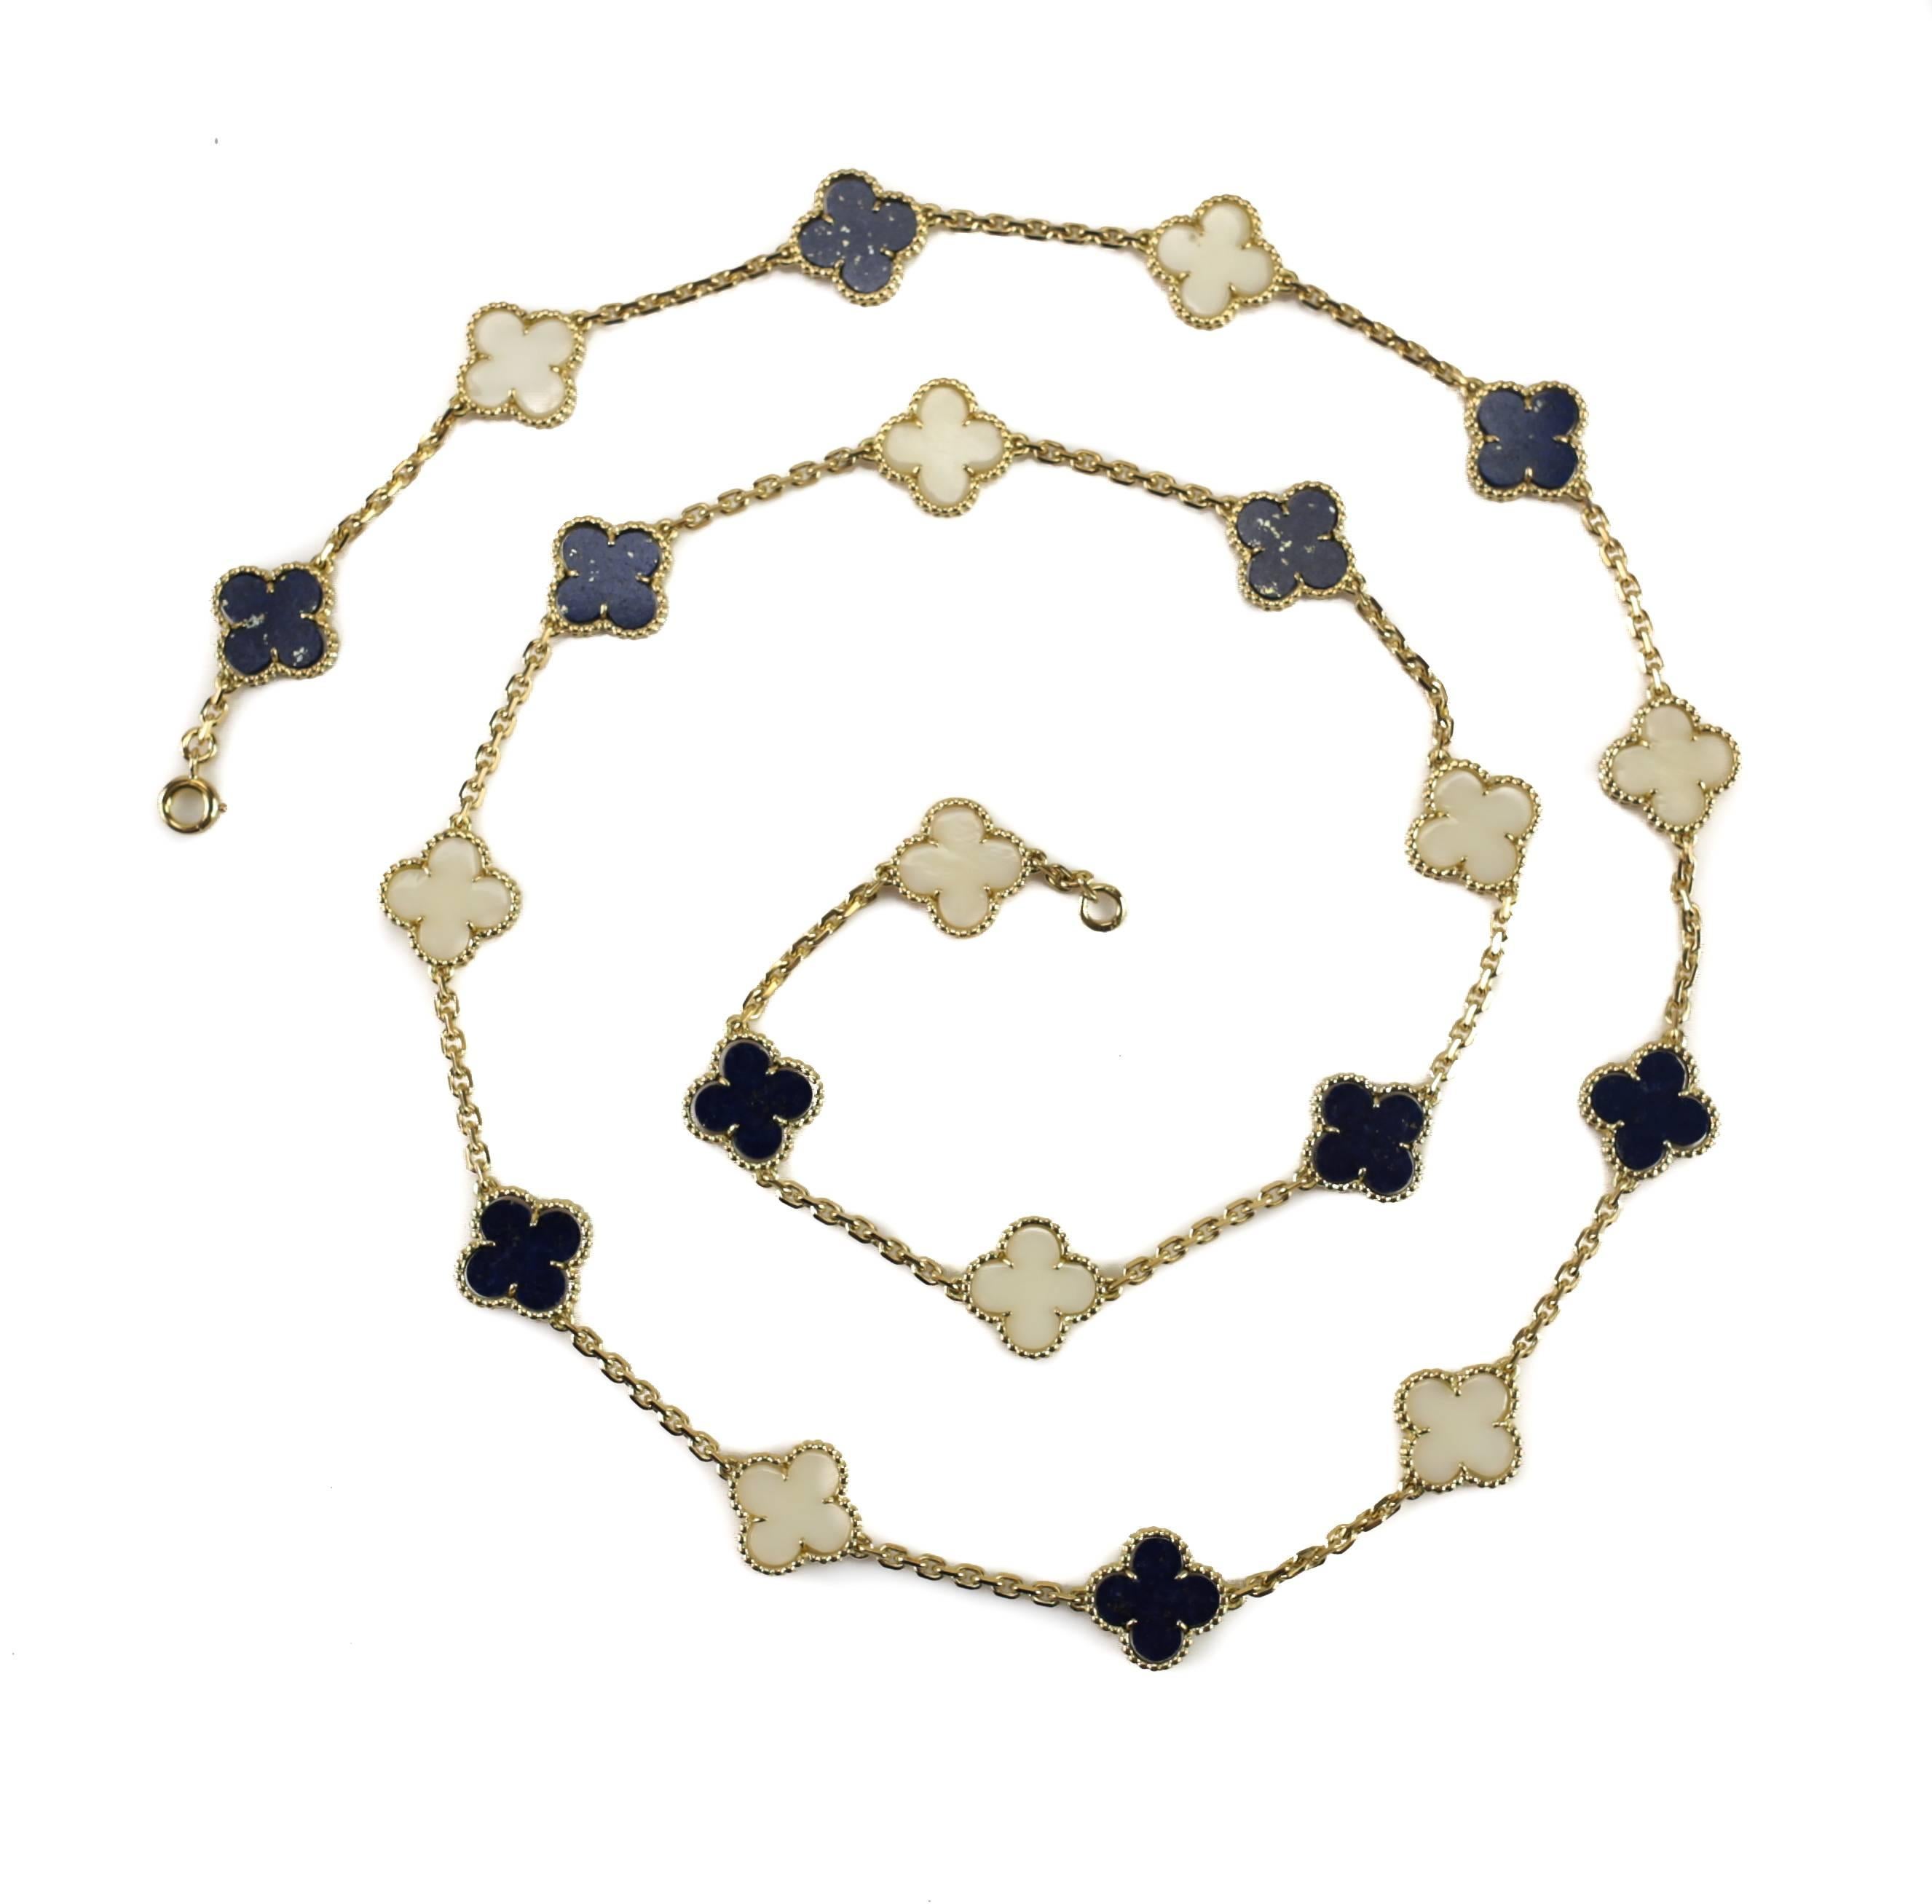 Lapis Lazuli and White Coral 20 Motif Alhambra Necklace by Van Cleef & Arpels In Excellent Condition For Sale In Pasadena, CA